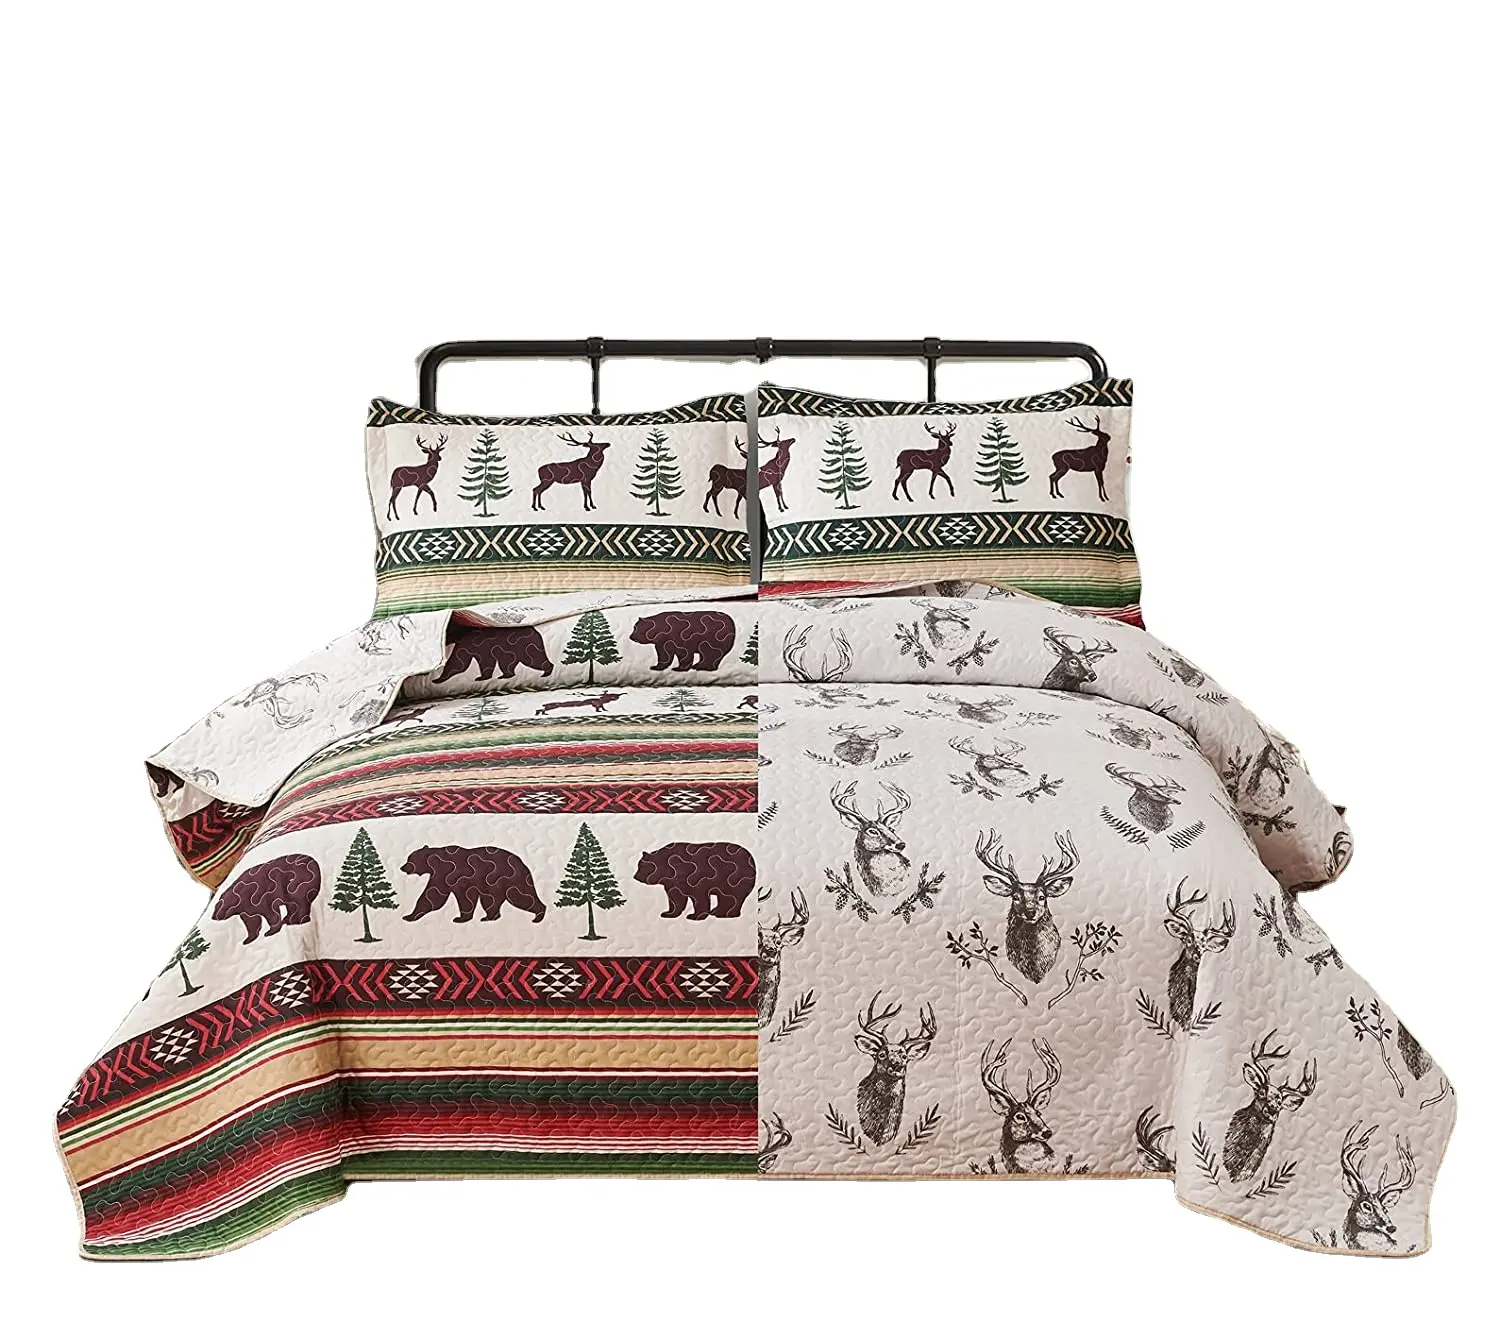 Rustic Bedspread Coverlet Quilt Bedding Country Lodge Cabin Quilt Lightweight Quilt Bedspread